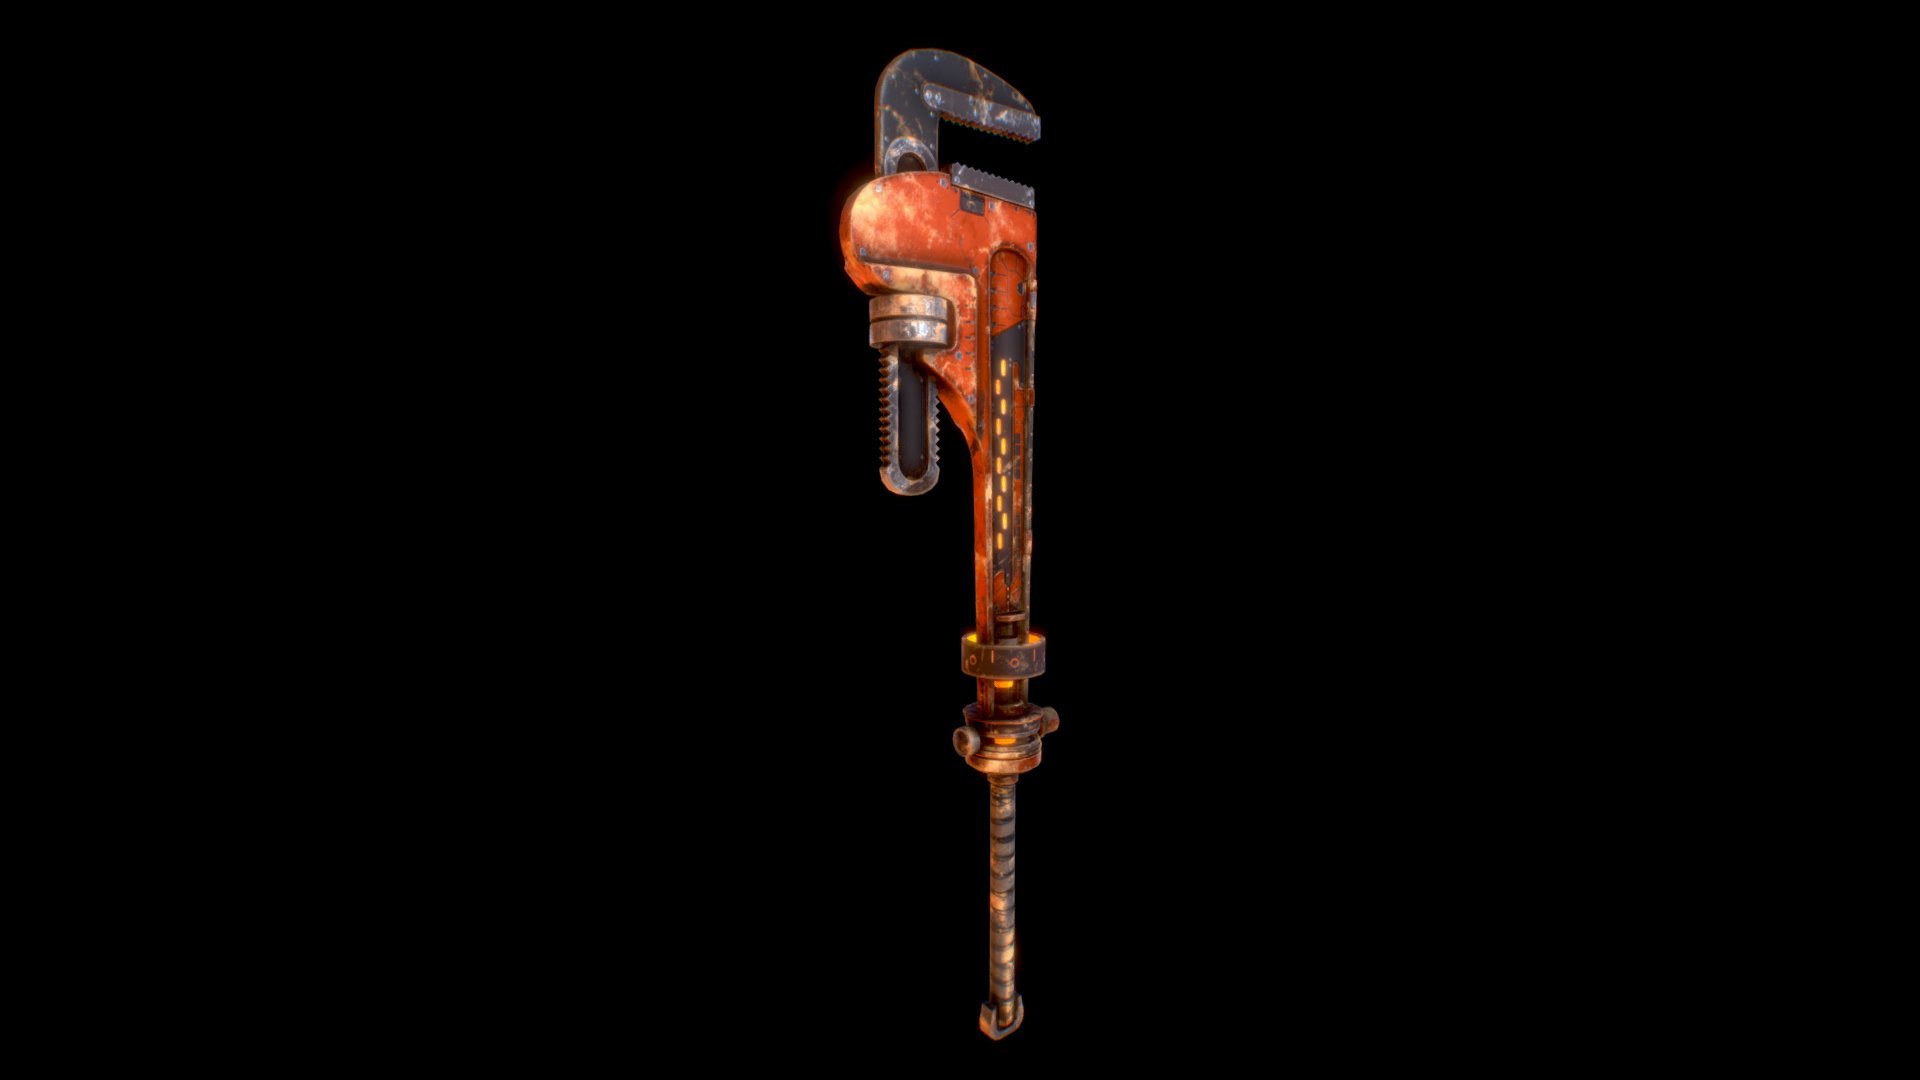 Modeling in Maya
PBR Material in substance Painter

Works for VR Animation EXT - Giant Pipe Wrench Weapon for VR Animation EXT - 3D model by yionguon 3d model